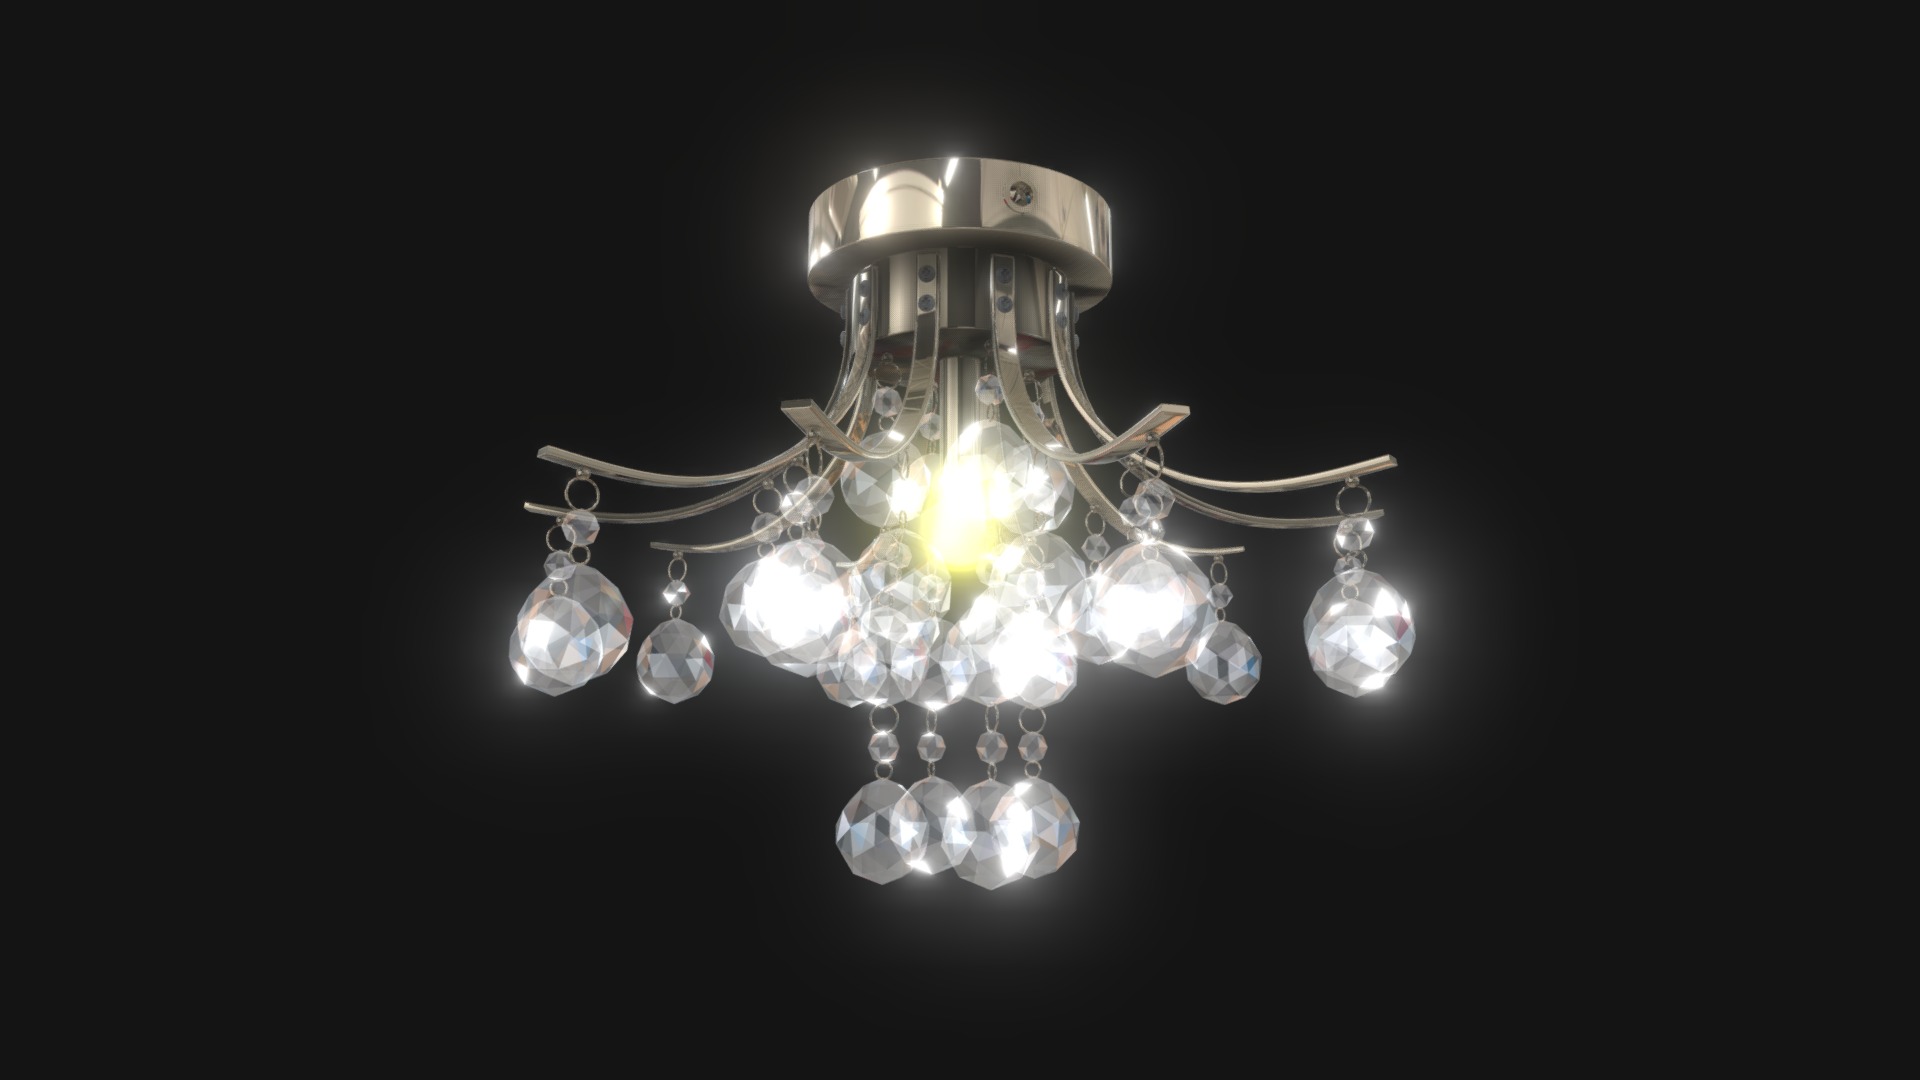 3D model HGPOGS-CL33 - This is a 3D model of the HGPOGS-CL33. The 3D model is about a chandelier with many light bulbs.